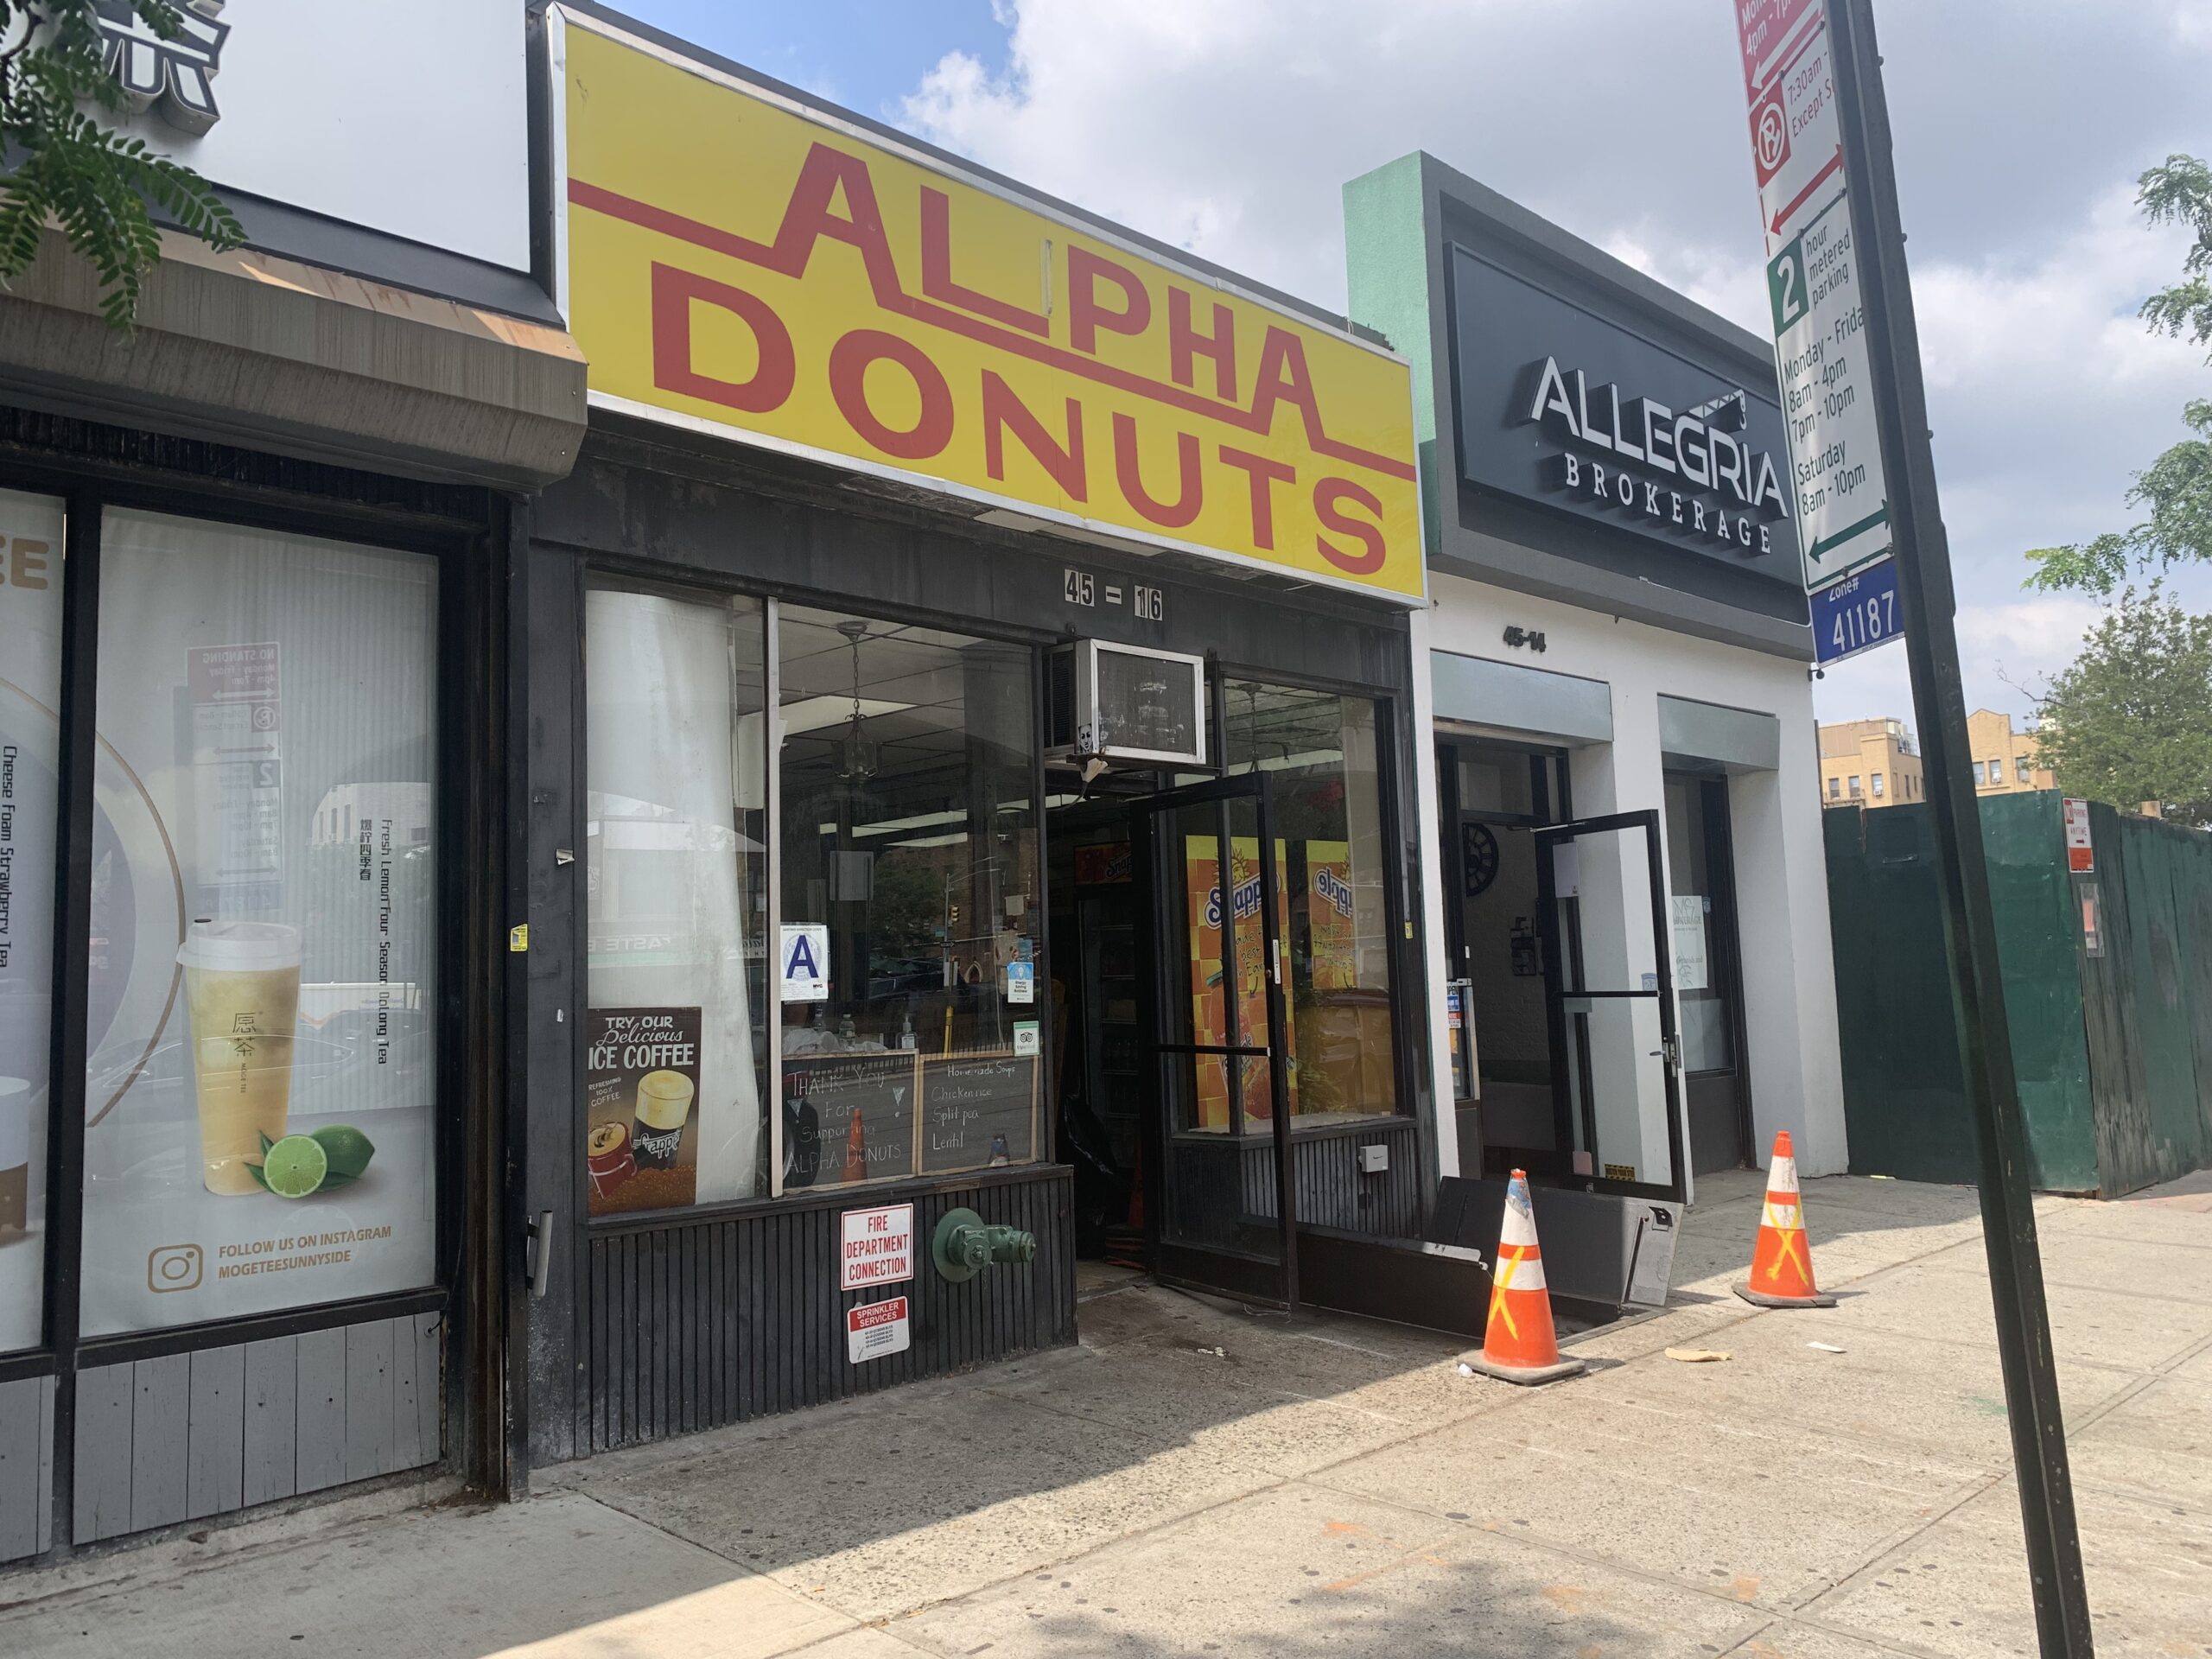 A small one-story shop sits on a street in Sunnyside, Queens, connected to two other small buildings. The shop has a bright yellow sign with the words "ALPHA DONUTS" written on it in red.